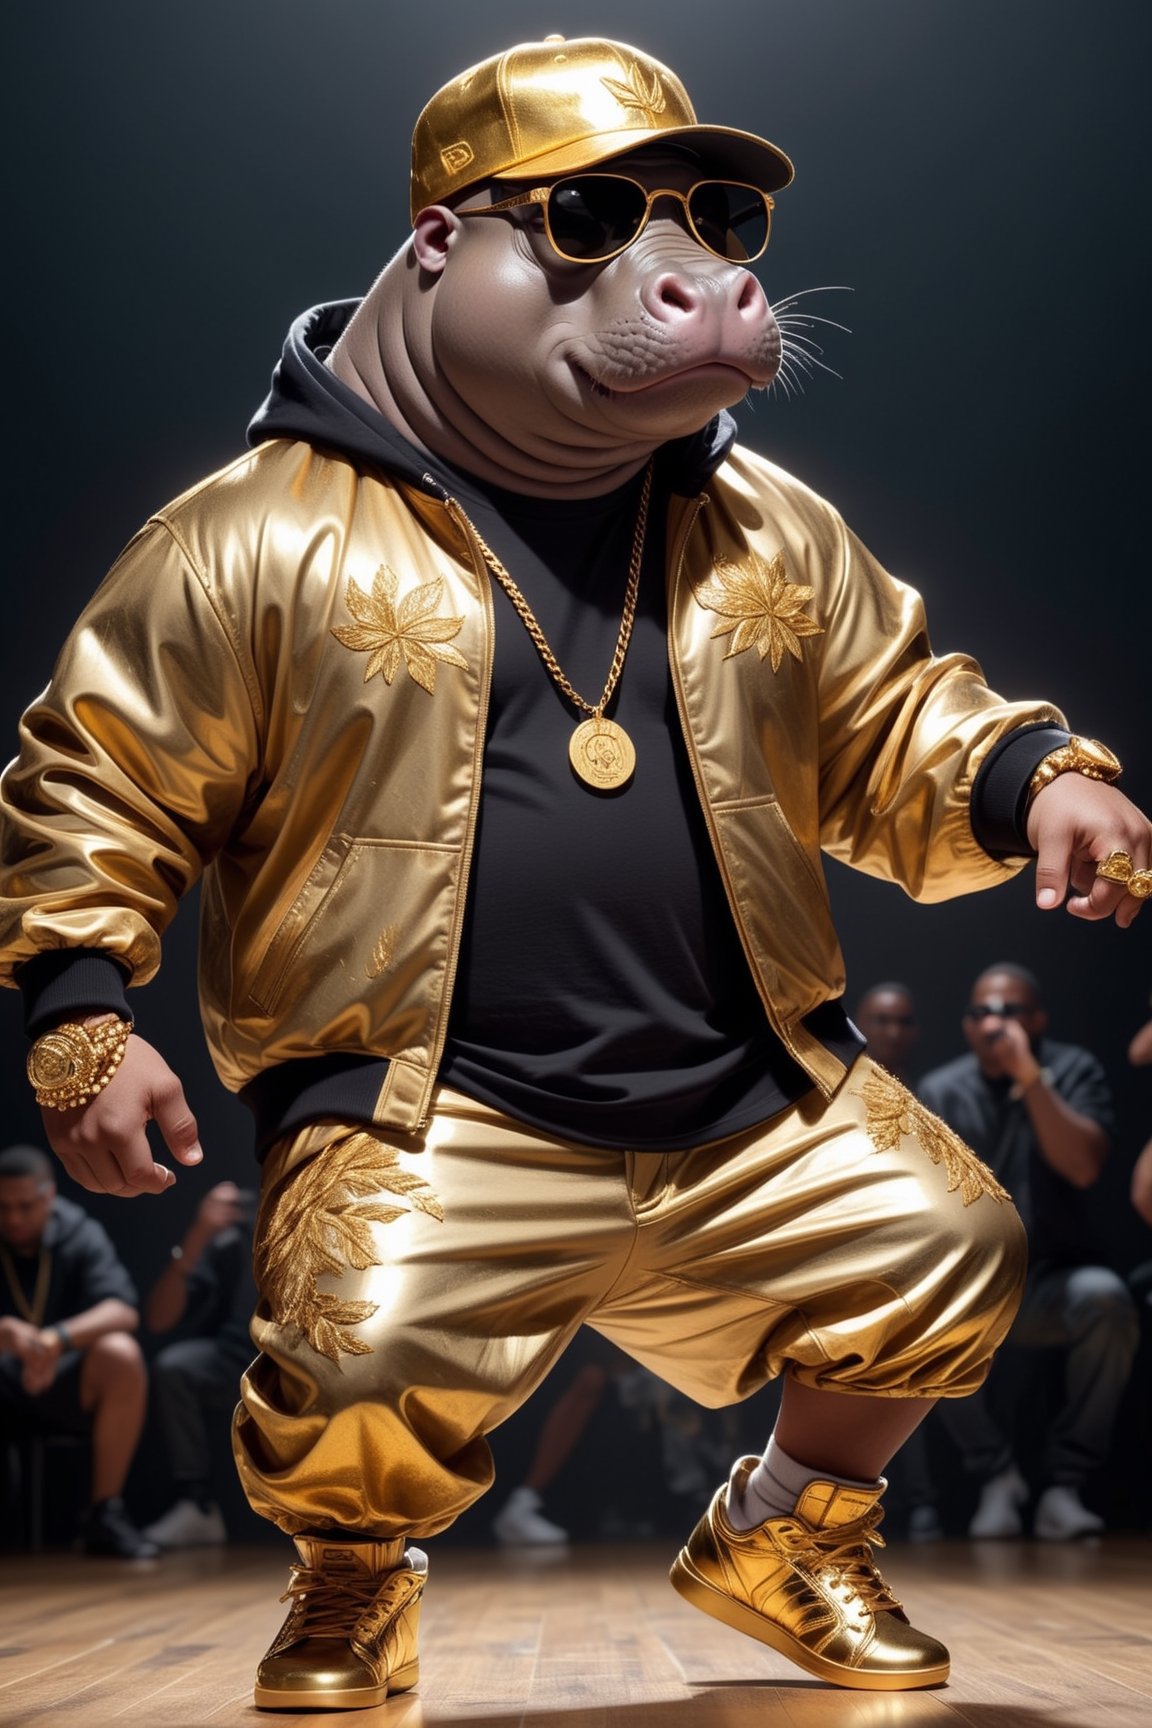 Dressed animals - a fat hippo dancer, ((dancing and singing)), god of hip hop, highly detailed ((hip hop fashion)) , highly detailed accessories , (wearing sunglasses and cap),dancing pose,wearing a jacket and hoodie delicately depicted with gold leaf detailing, printed onto a substantial and regal coat,Emphasize the intricate application of gold foil to capture the strength and valor of hip hop dancer. Ensure a visually stunning representation that combines the opulence of gold leaf with the historical passion of hip hop , creating a unique and impressive fashion through innovative image generation techniques.",abmhandsomeguy,(full body image:1.5), stadio lighting